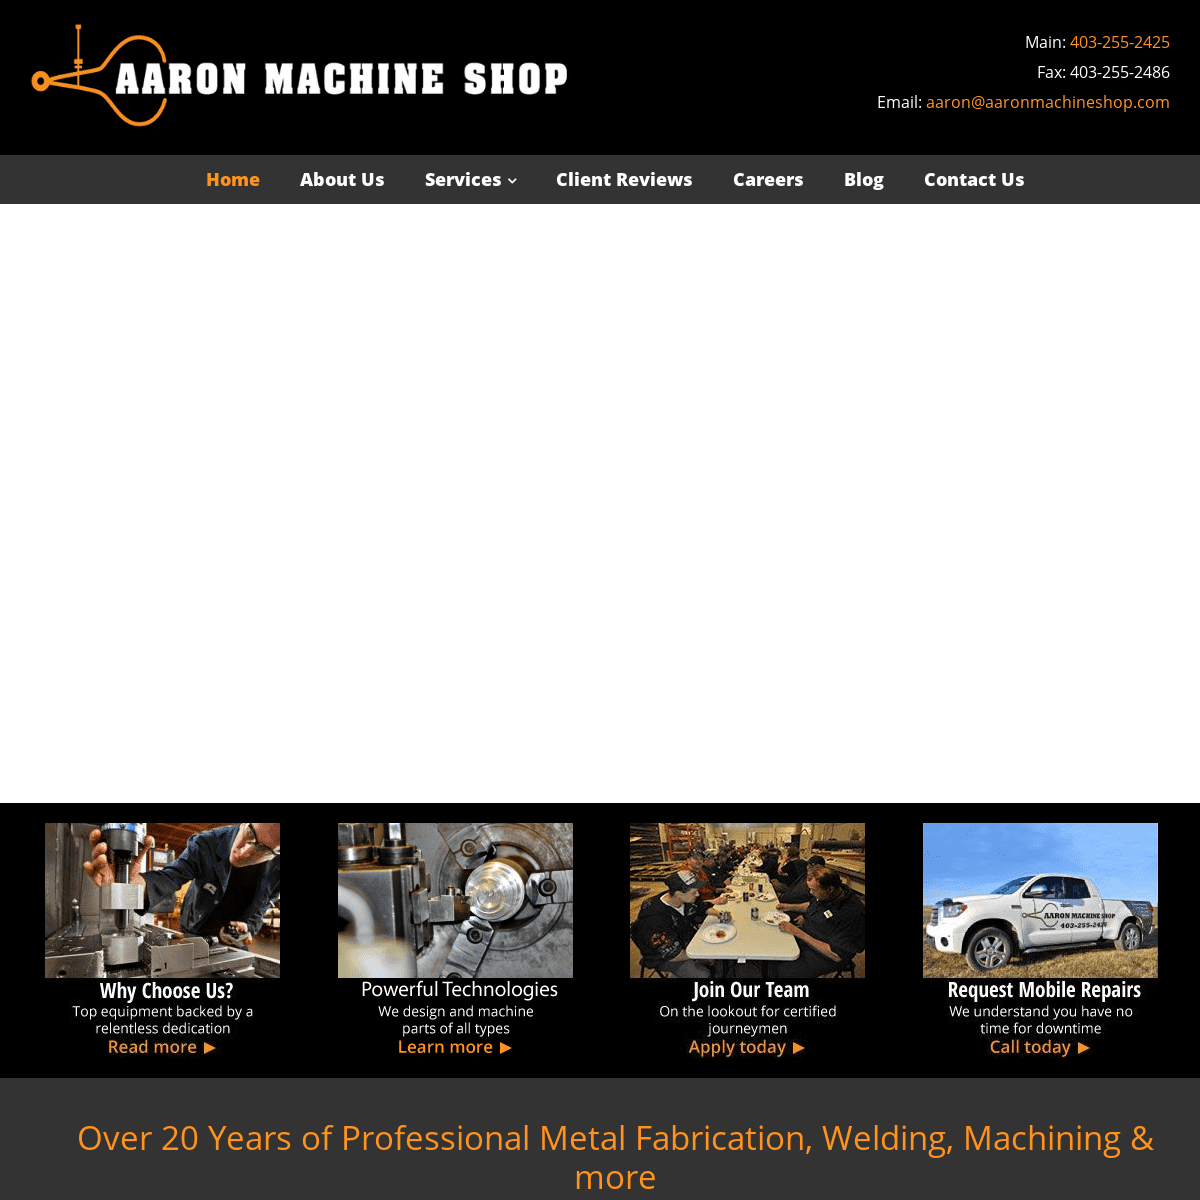 A complete backup of aaronmachineshop.com